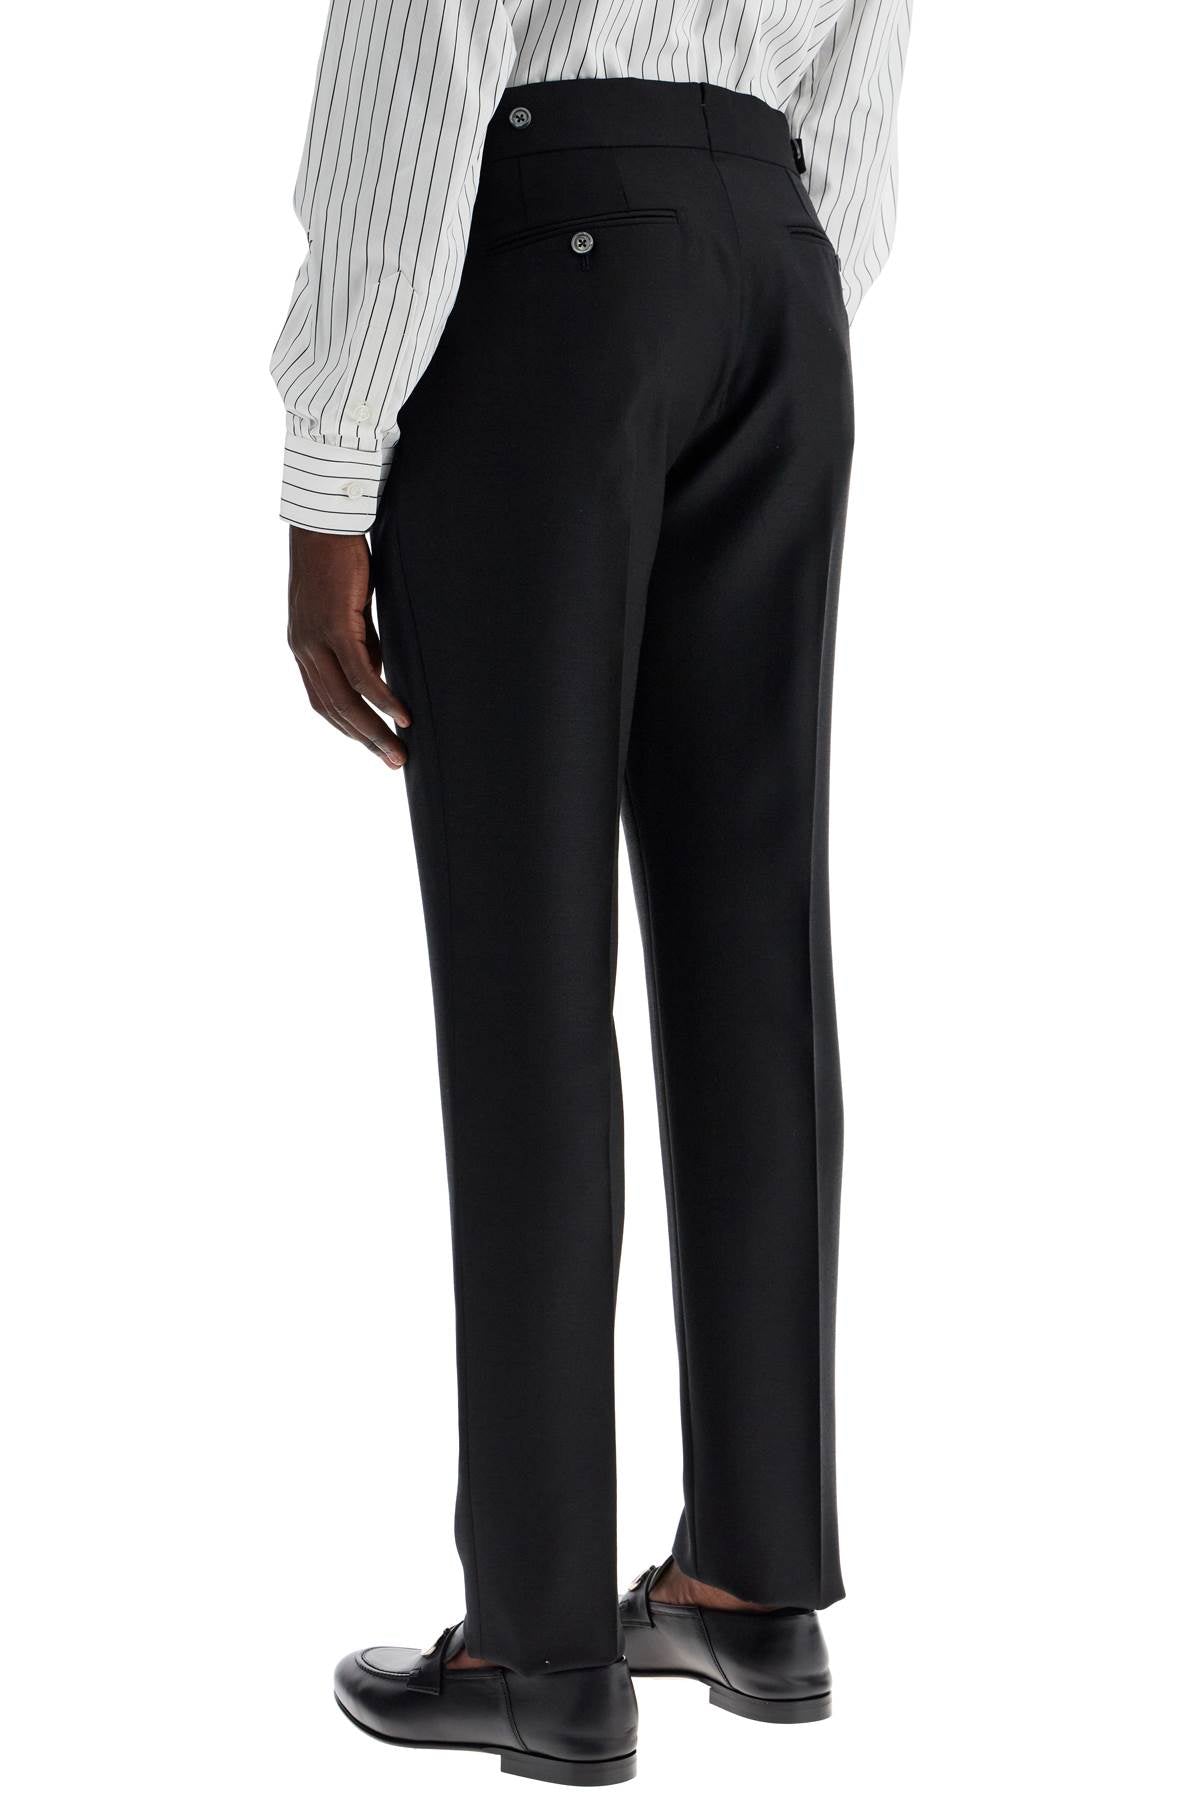 TOM FORD TAILORED WOOL AND MOHAIR TROUSERS